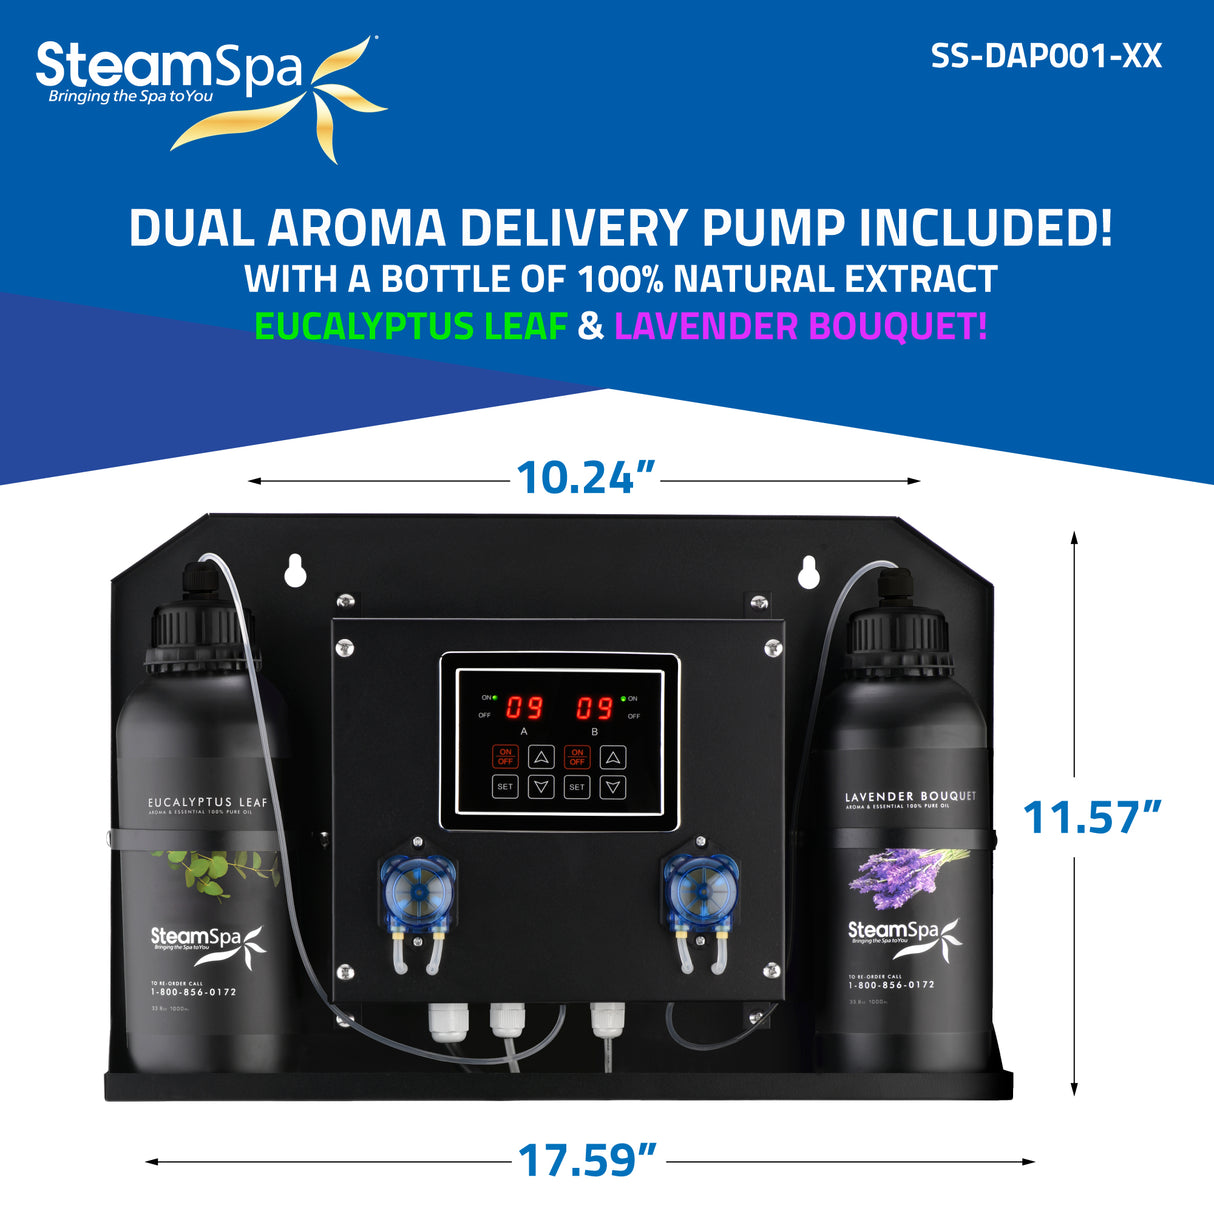 Steam Shower Generator Kit System | Brushed Nickel + Self Drain Combo| Dual Bottle Aroma Oil Pump | Enclosure Steamer Sauna Spa Stall Package|Touch Screen Wifi App/Bluetooth Control Panel |10.5 kW Raven | RVB1050BN-ADP RVB1050BN-ADP